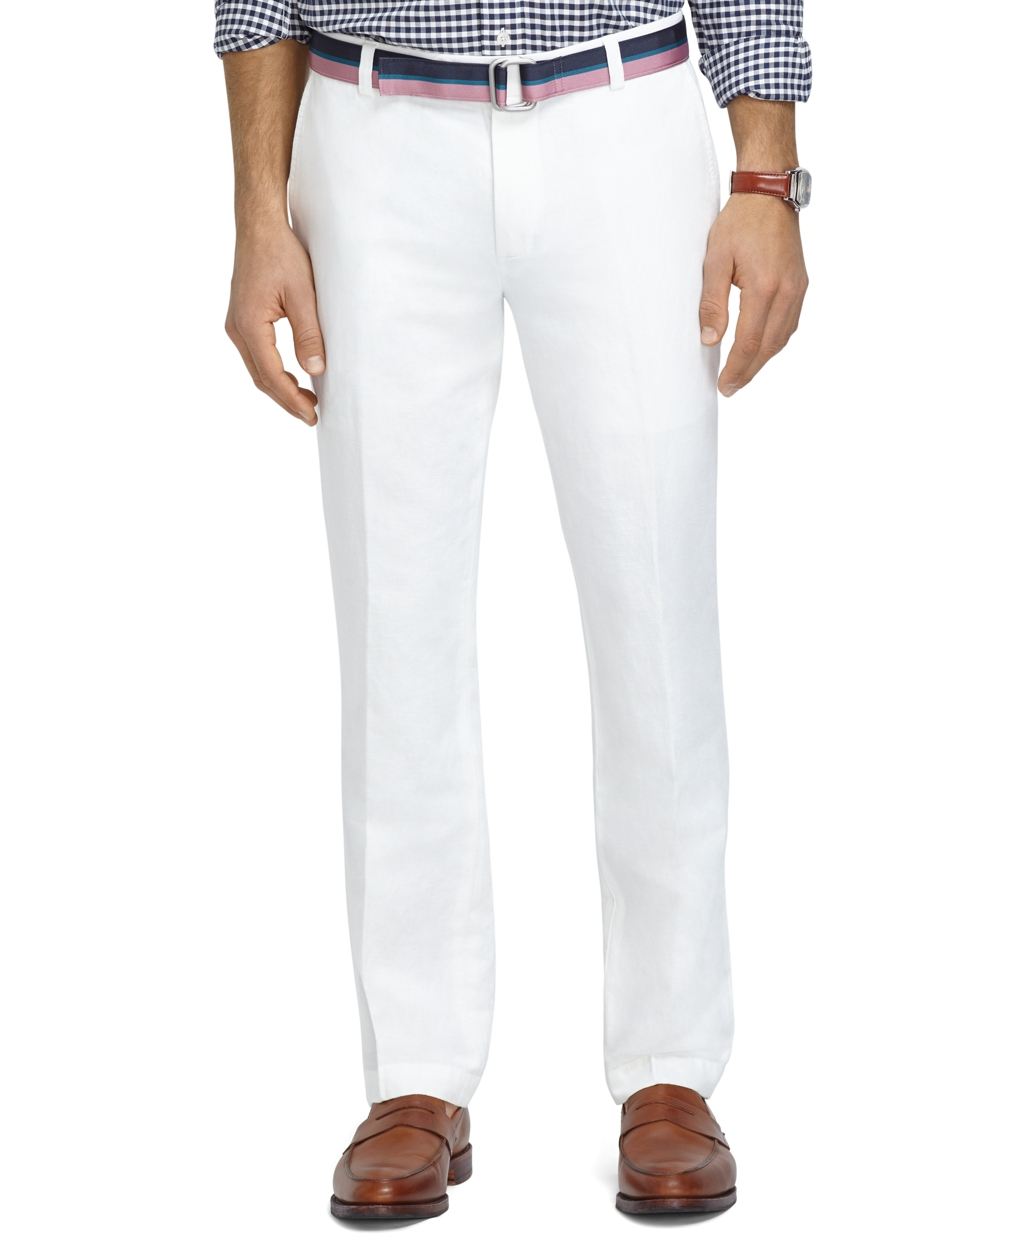 Lyst - Brooks Brothers Milano Fit Linen and Cotton Pants in White for Men